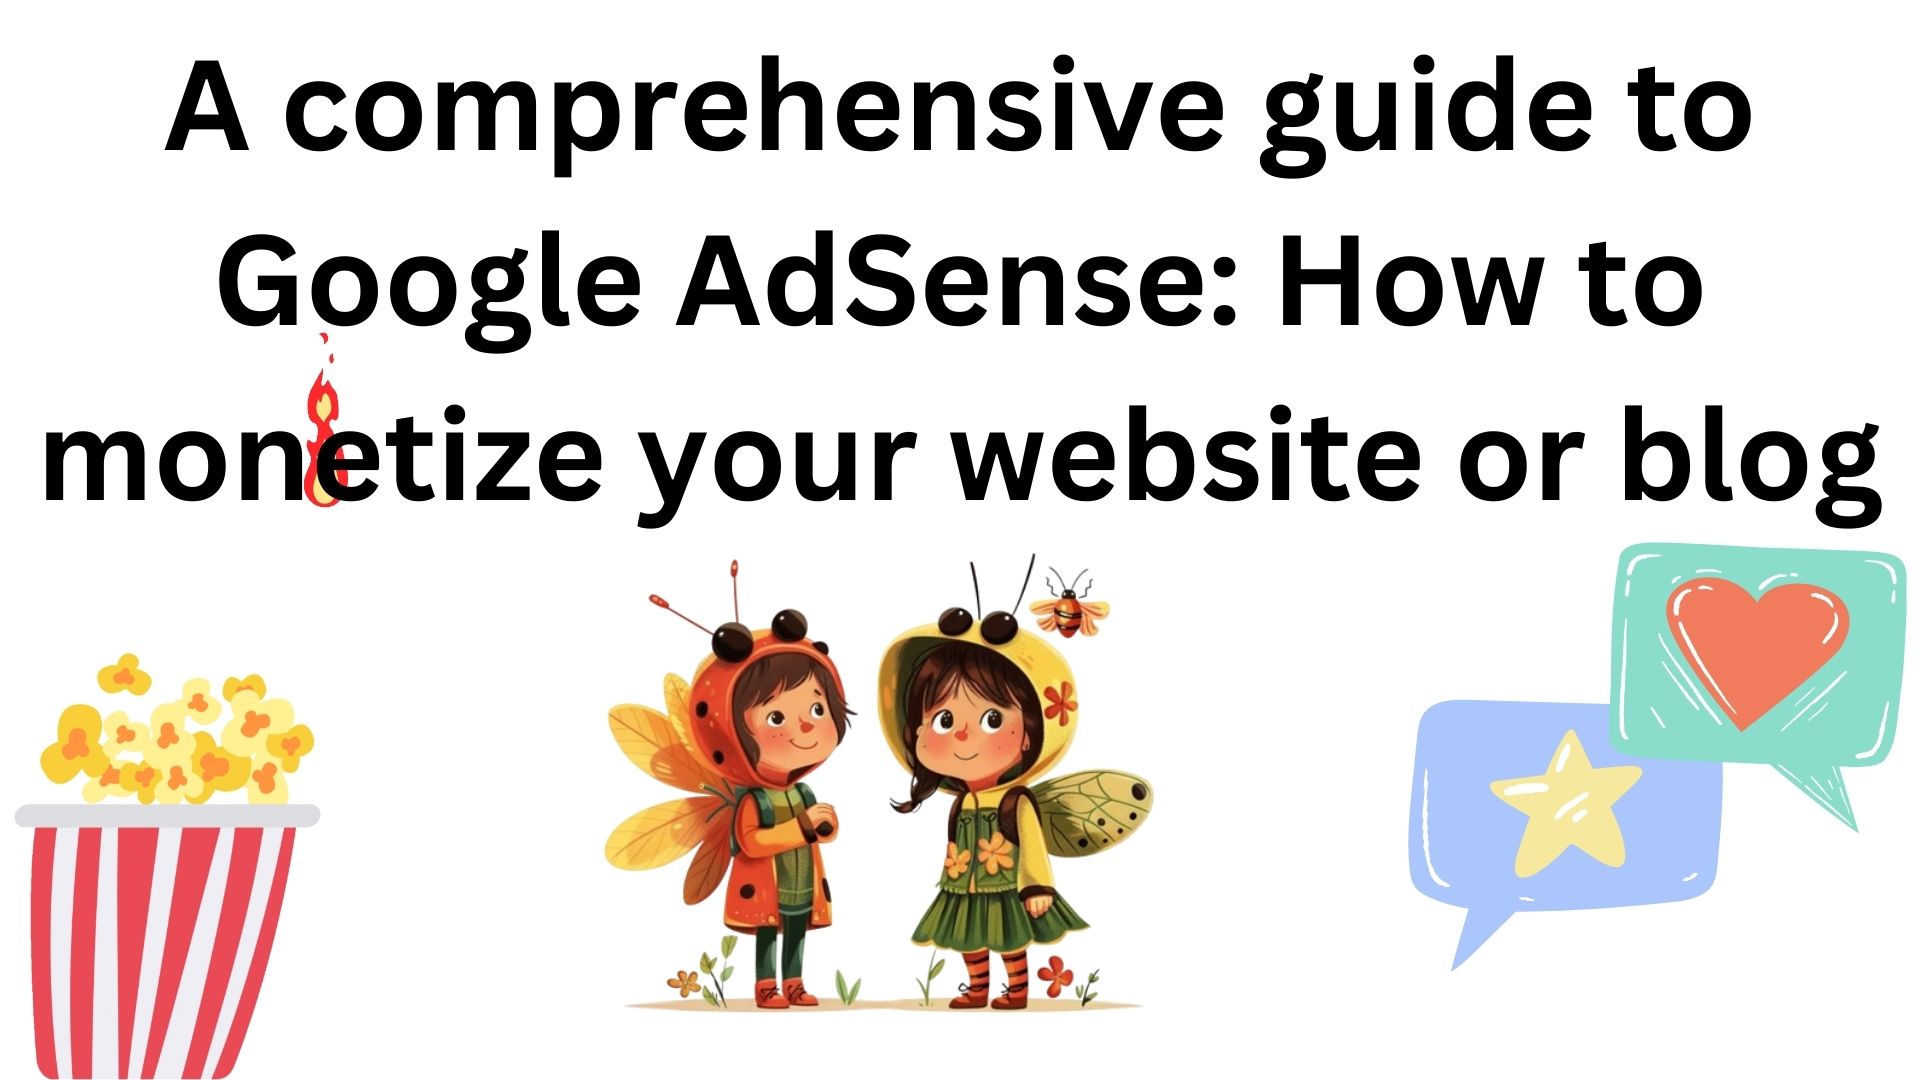 A Comprehensive Guide To Google Adsense: How To Monetize Your Website Or Blog